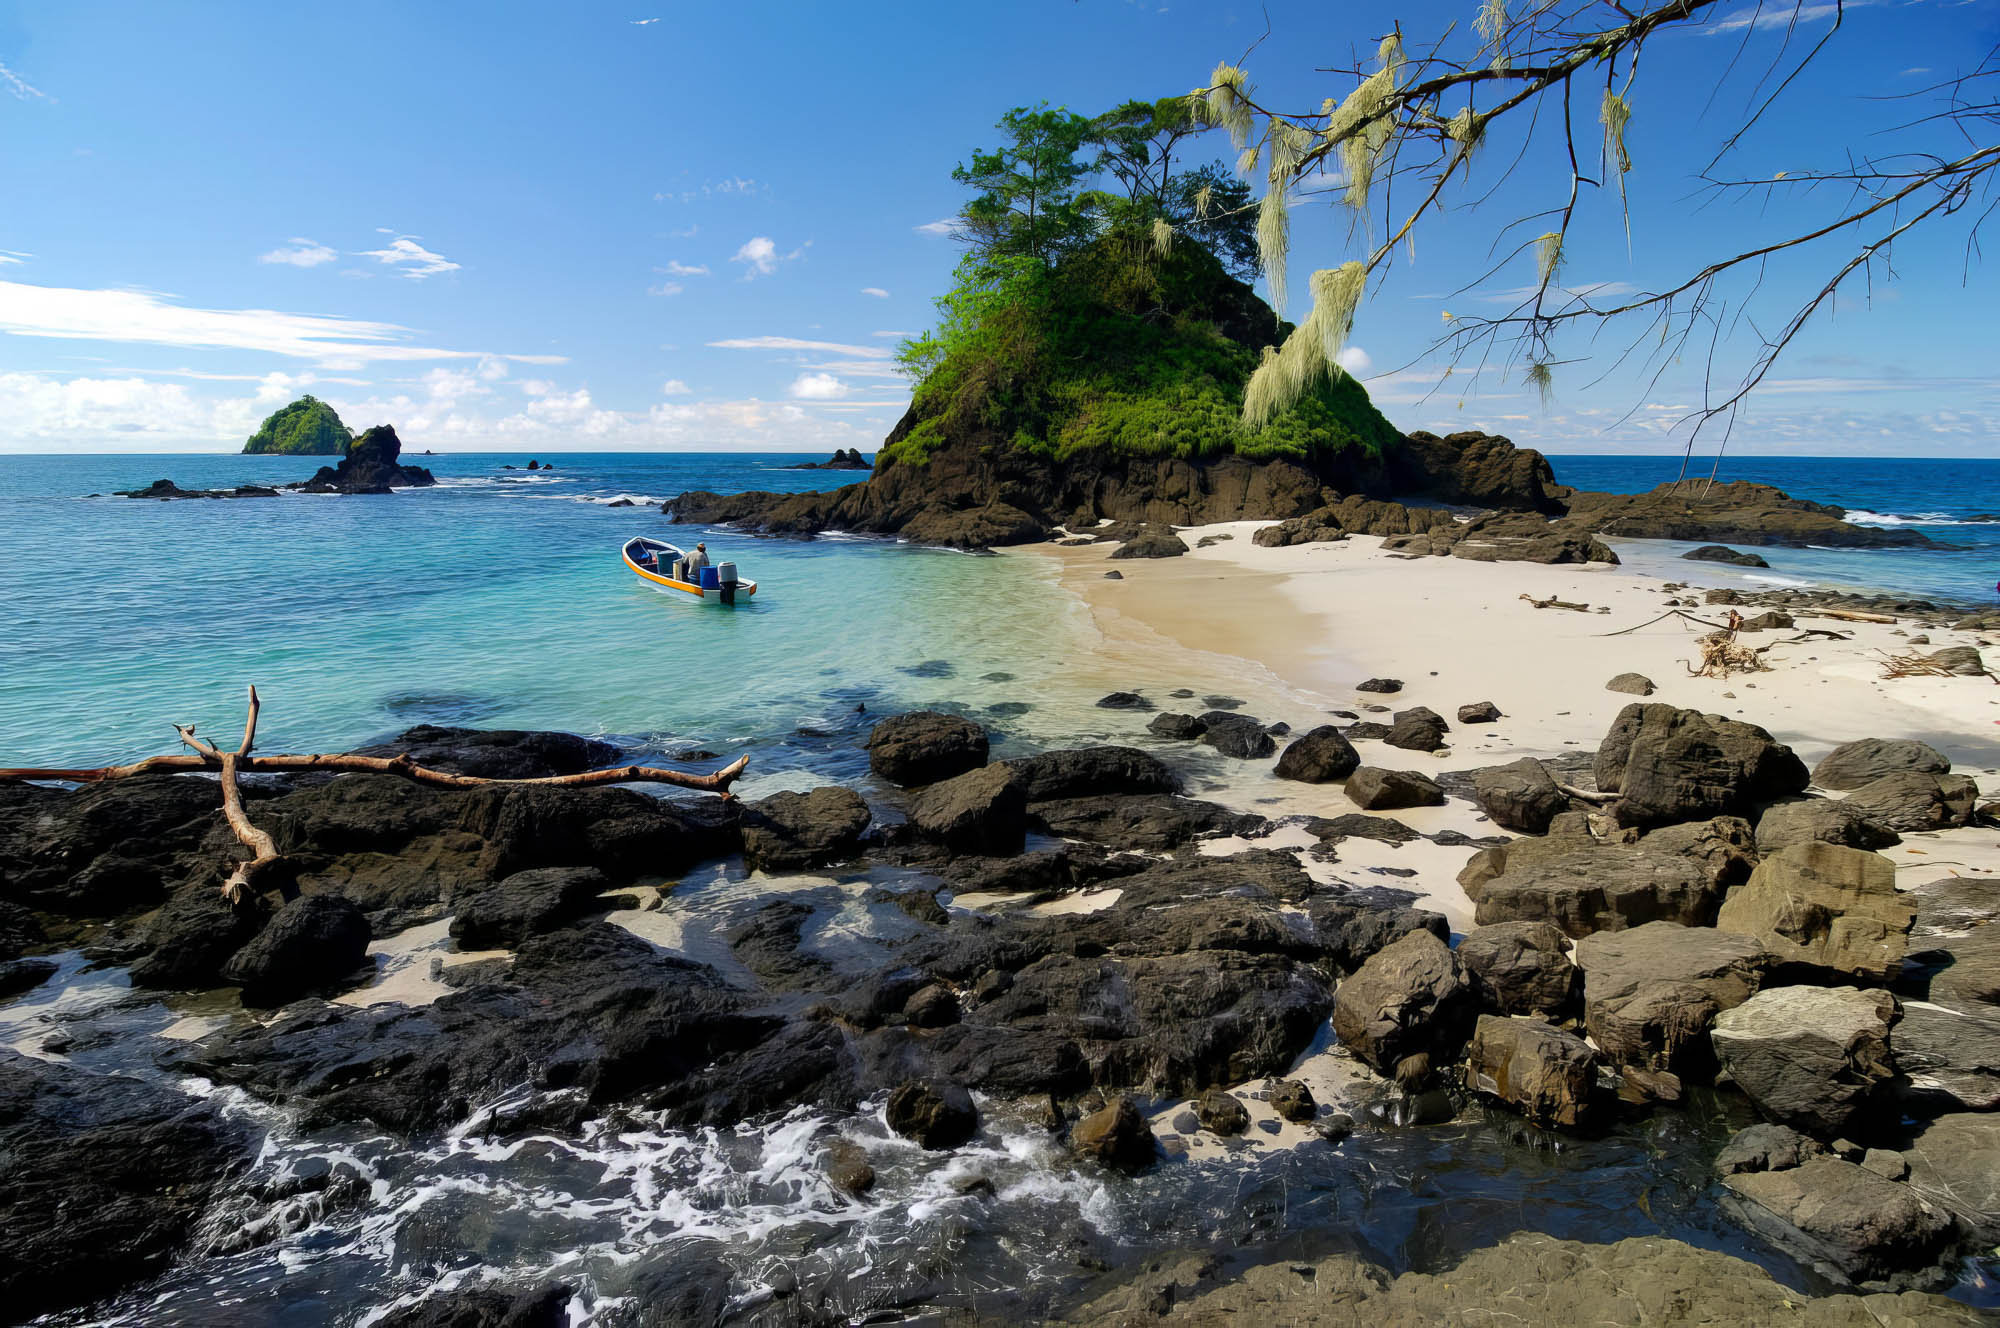 Travel + Leisure Features “Panama’s Incredible Beaches, Rainforests & Wildlife”